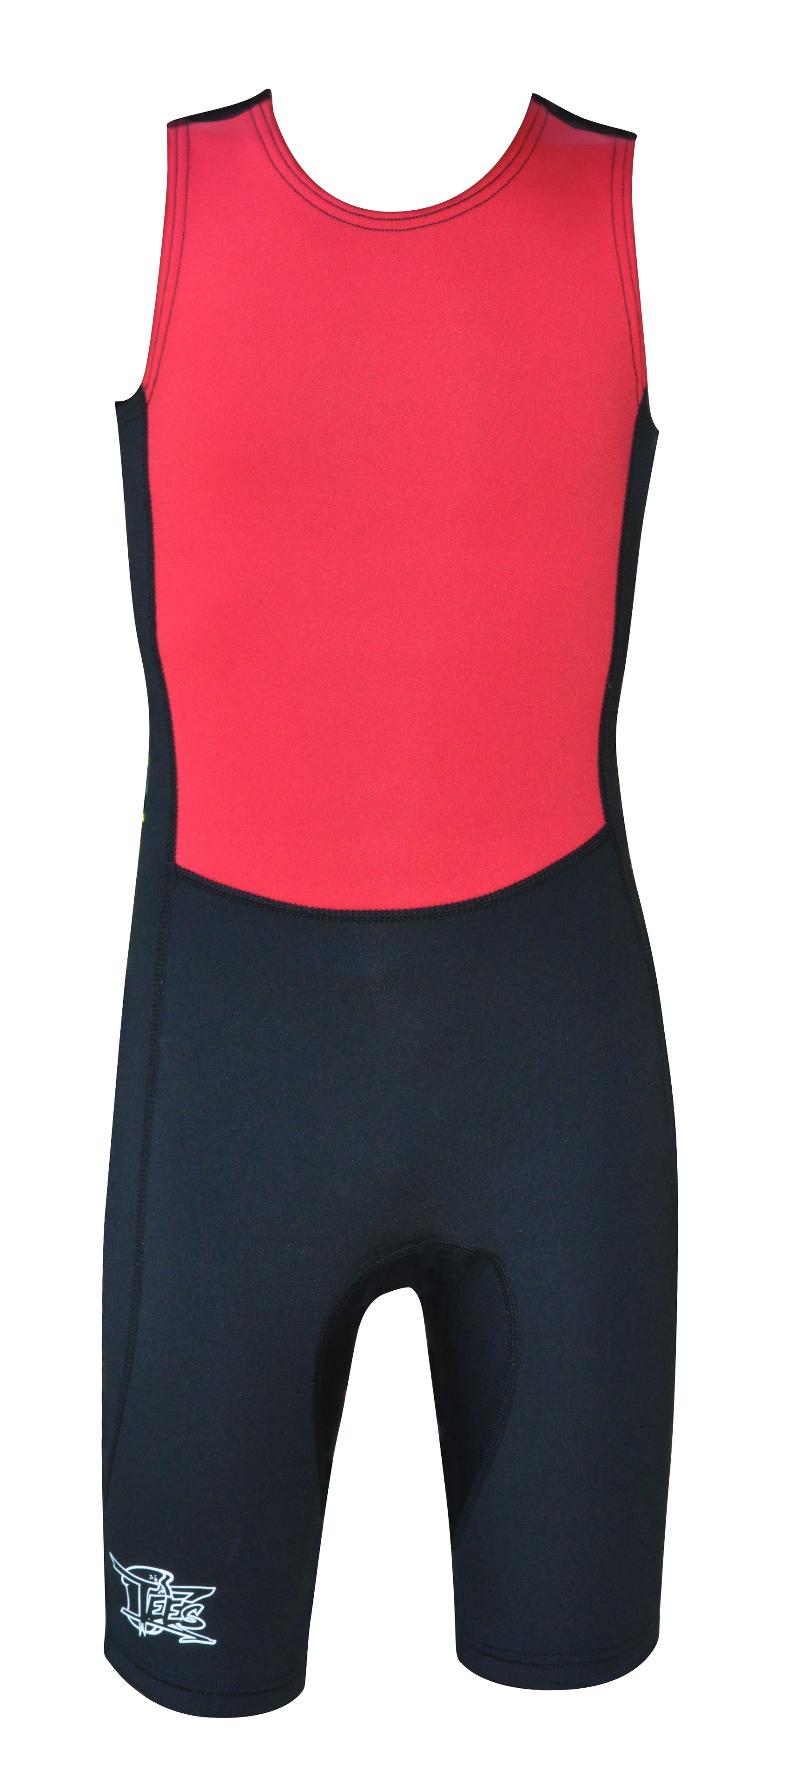 Kids Training Suit Red Black sizes 6, 8 and 10